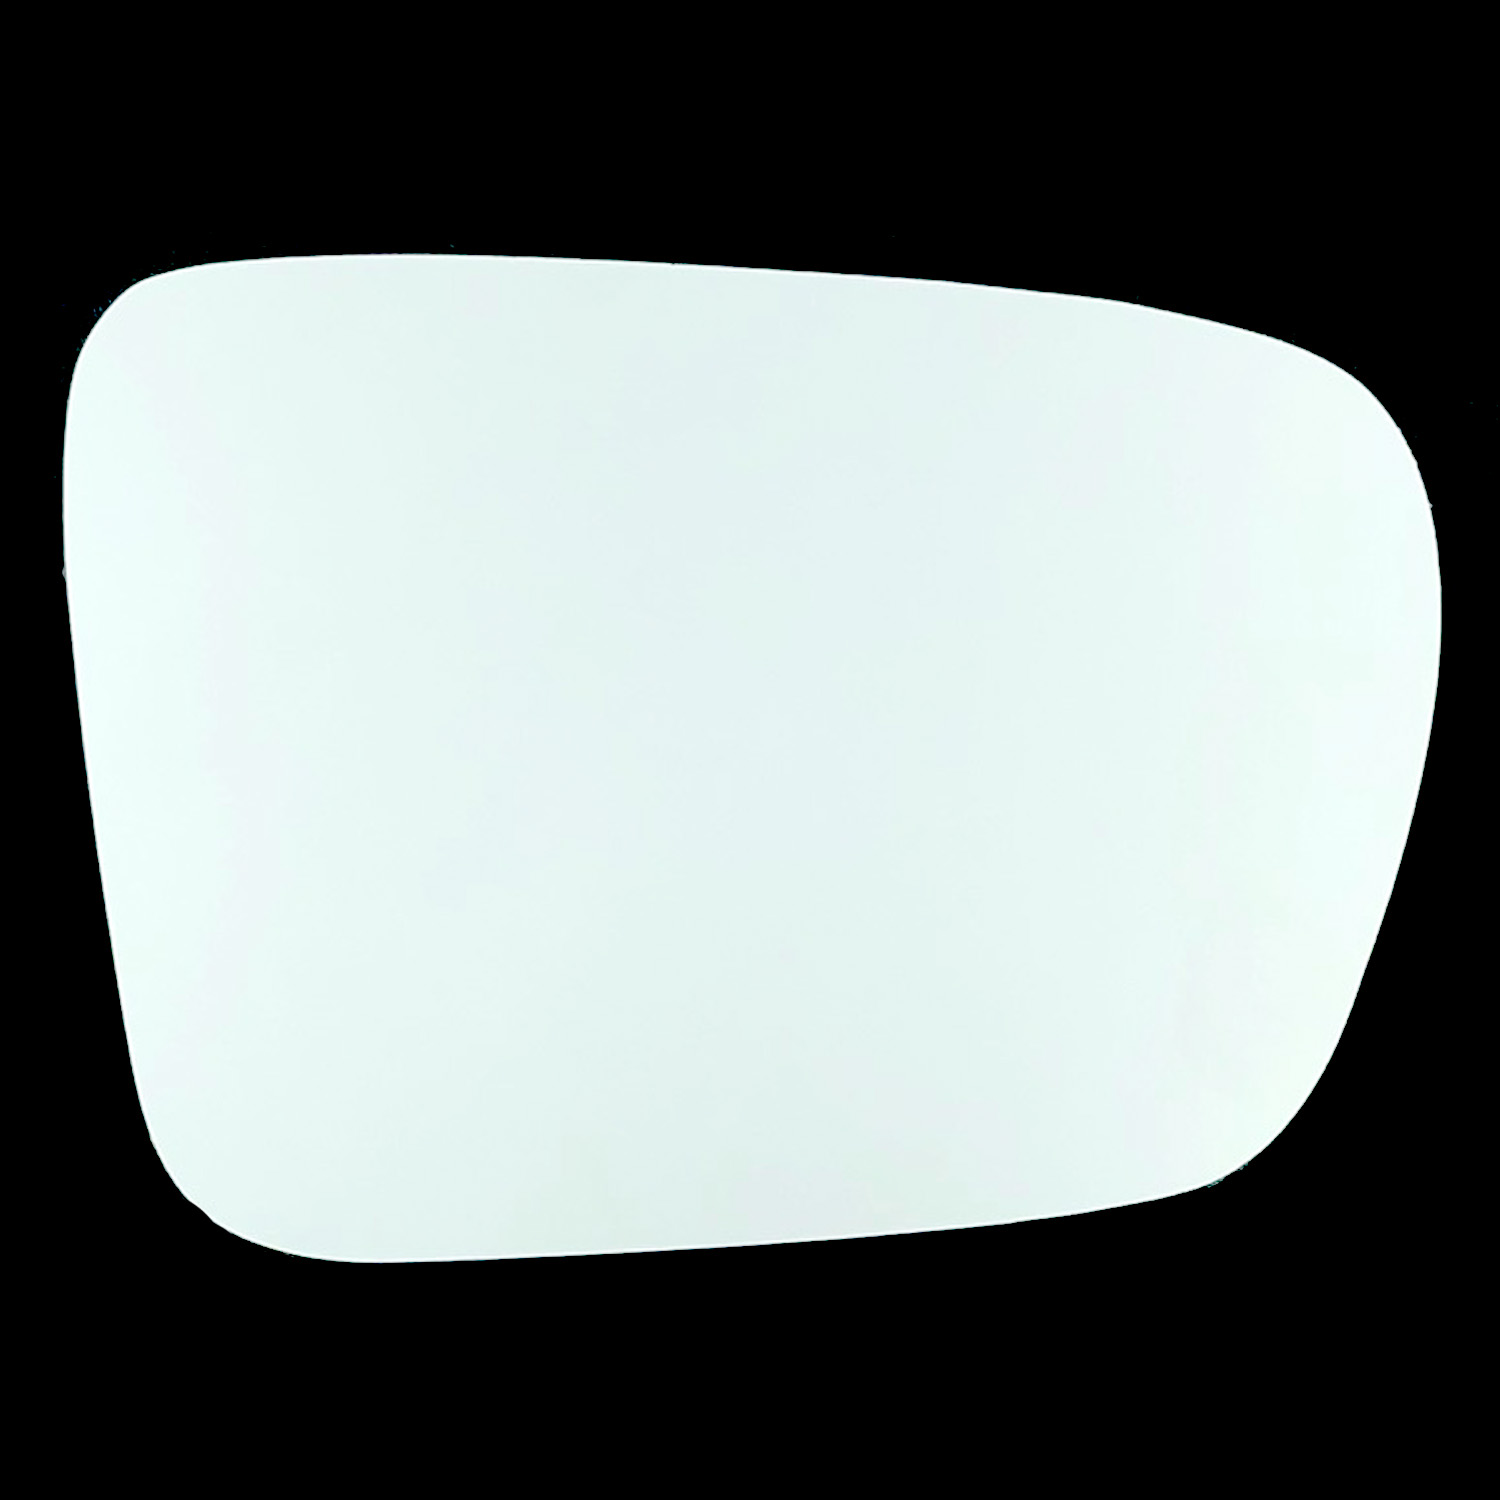 Chevrolet Orlando Wing Mirror Glass LEFT HAND ( UK Passenger Side ) 2011 to 2015 – Convex Wing Mirror